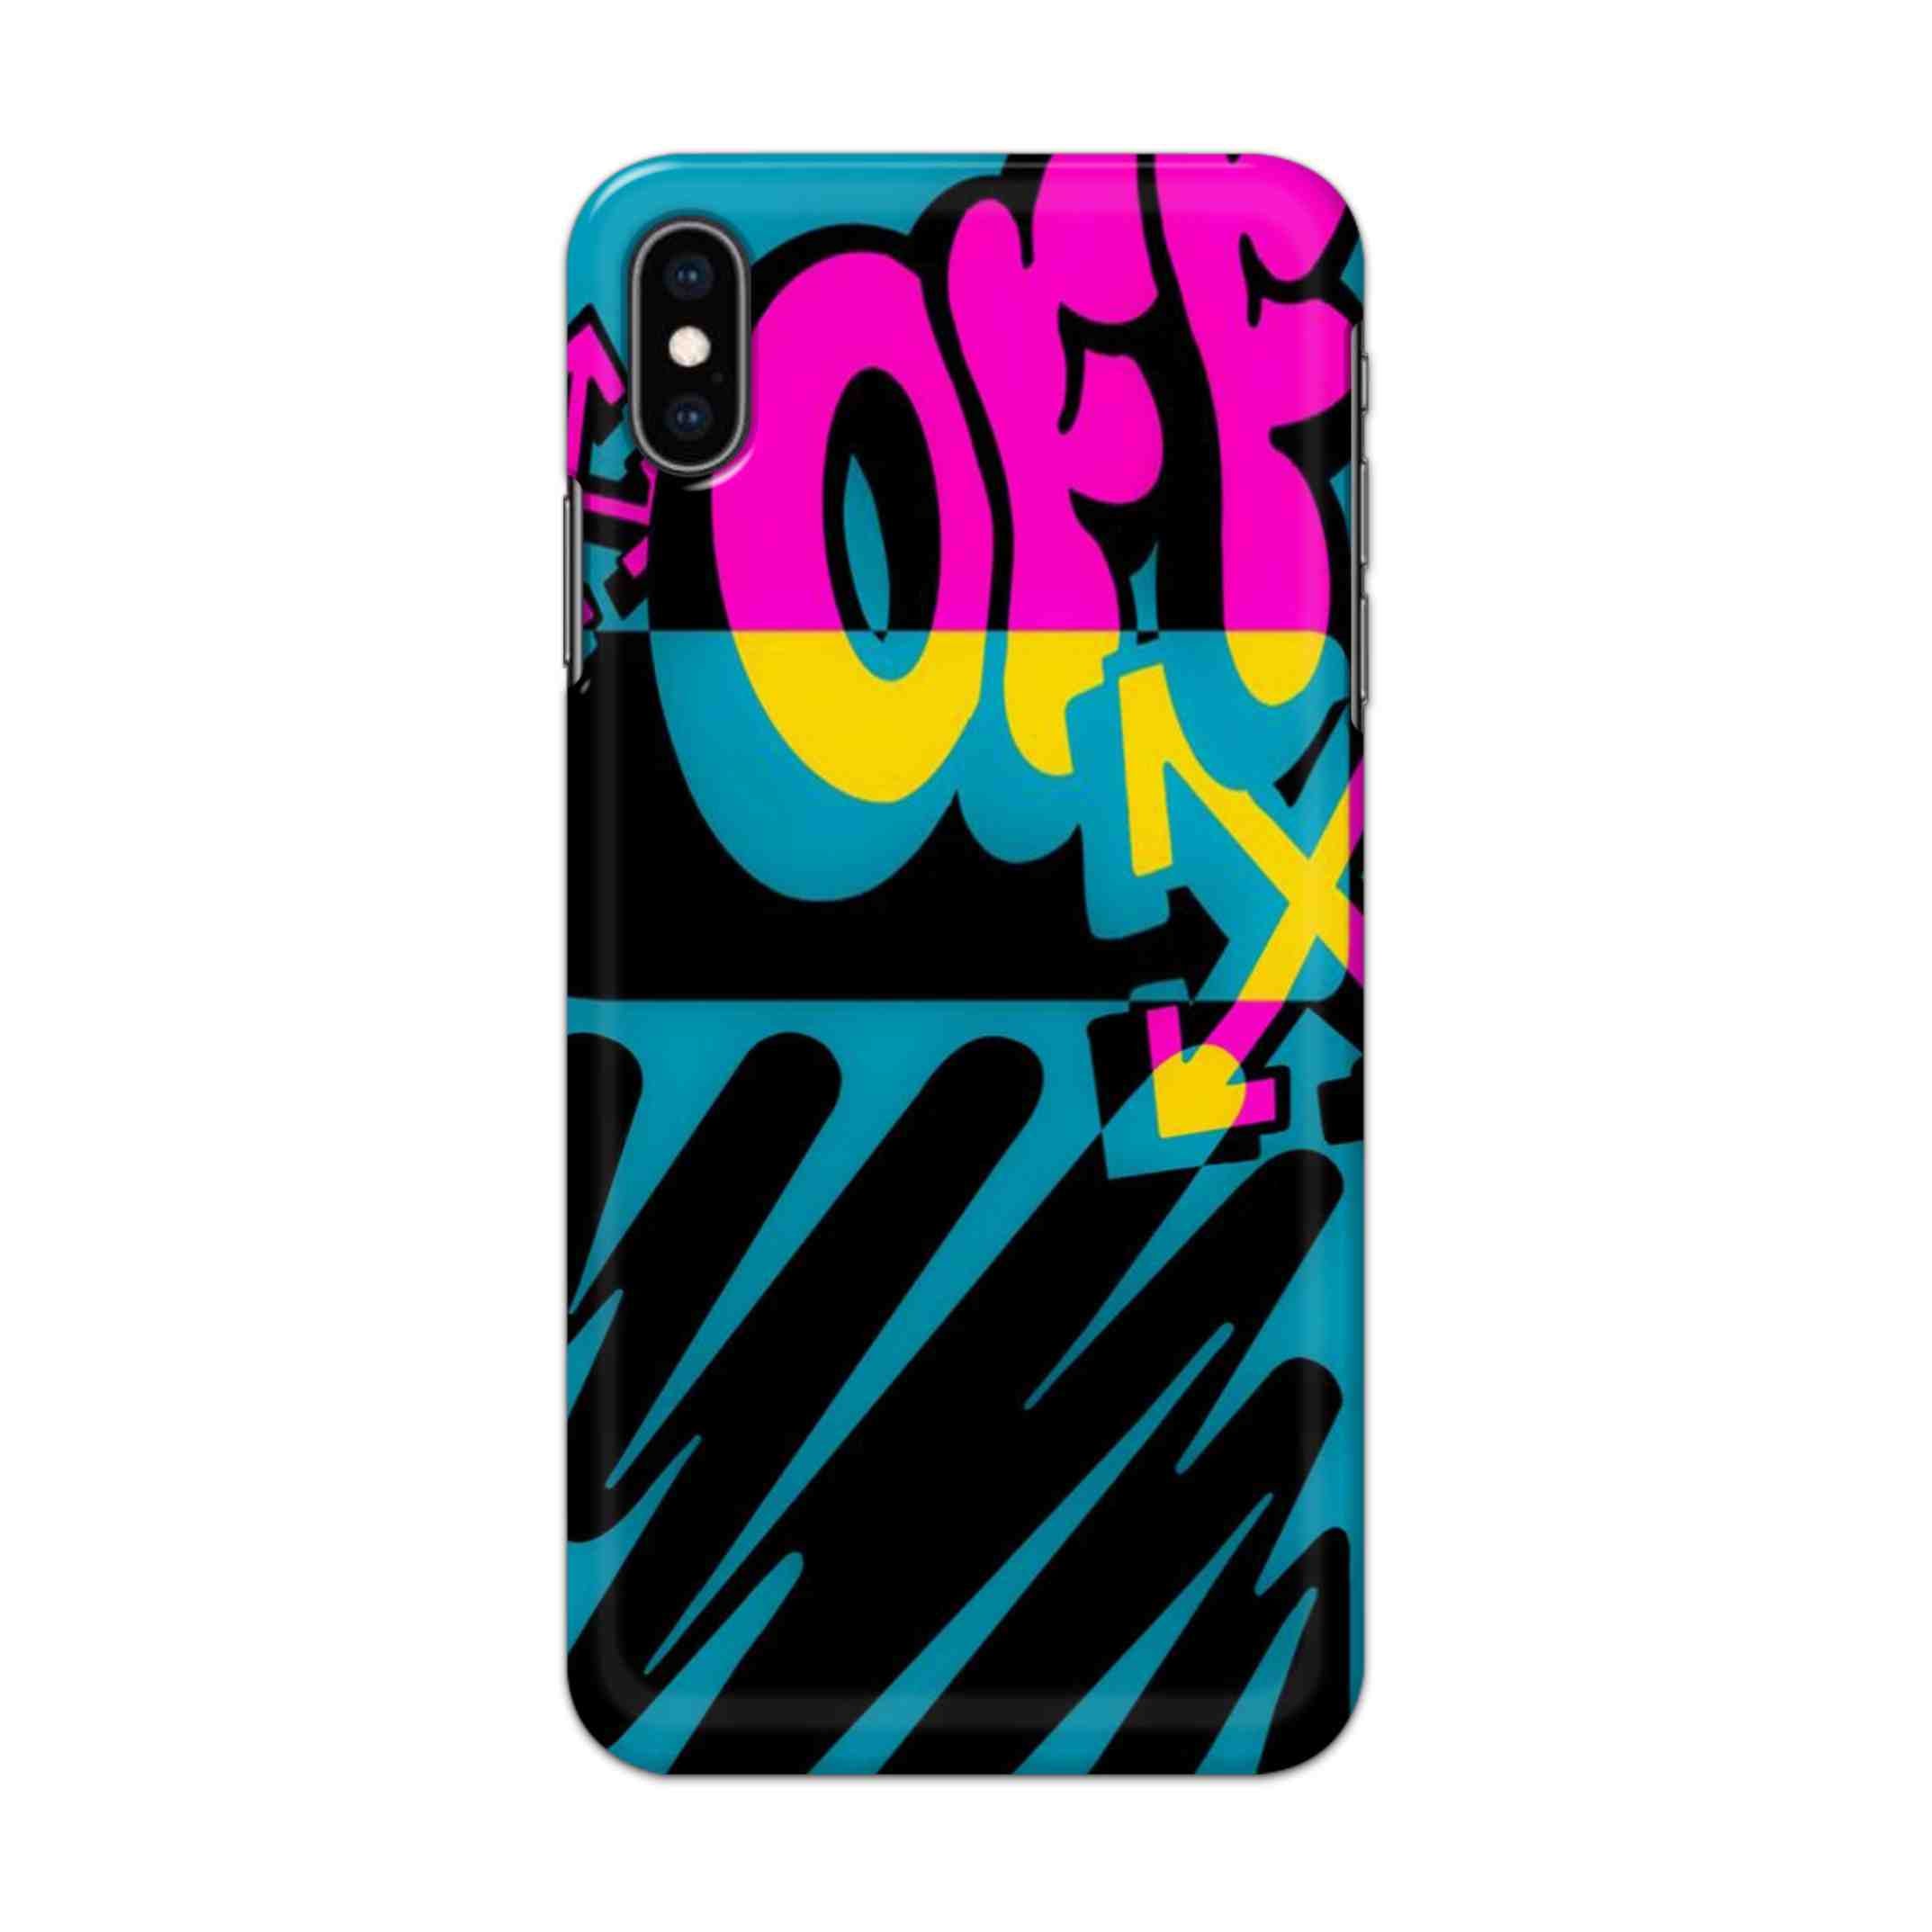 Buy Off Hard Back Mobile Phone Case/Cover For iPhone XS MAX Online